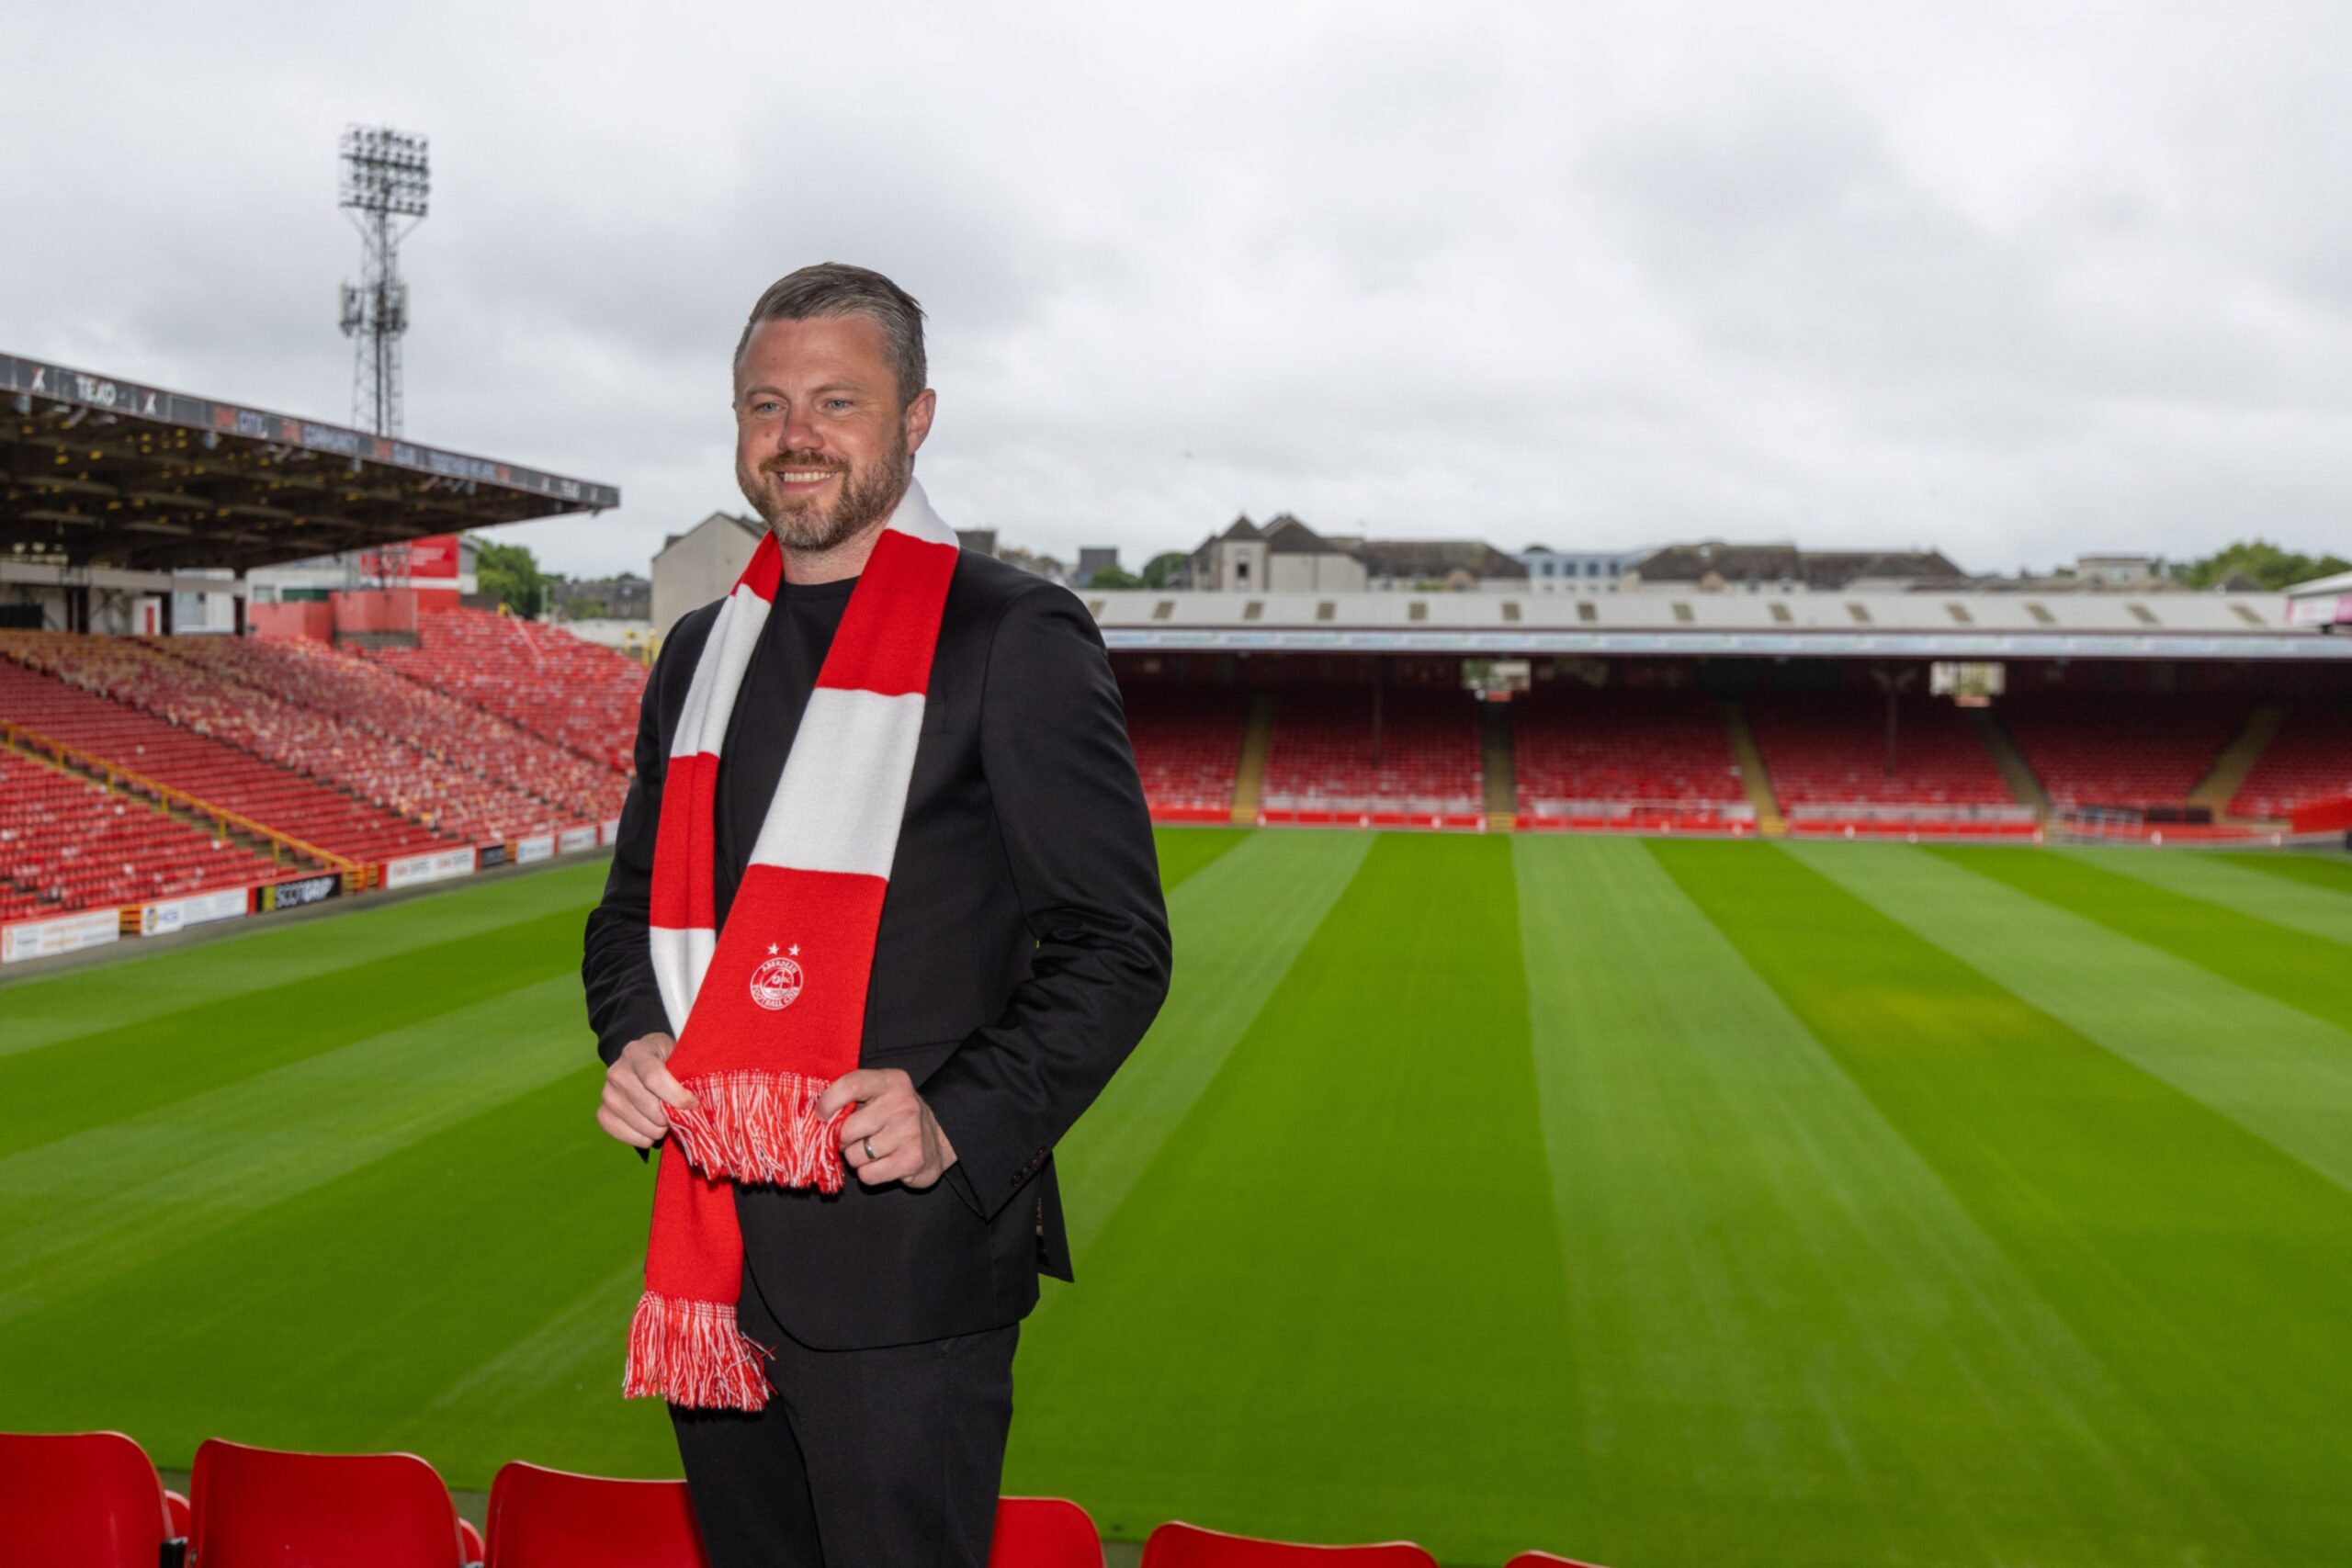 Aberdeen manager Jimmy Thelin at Pittodrie. Image: Scott Baxter / DC Thomson